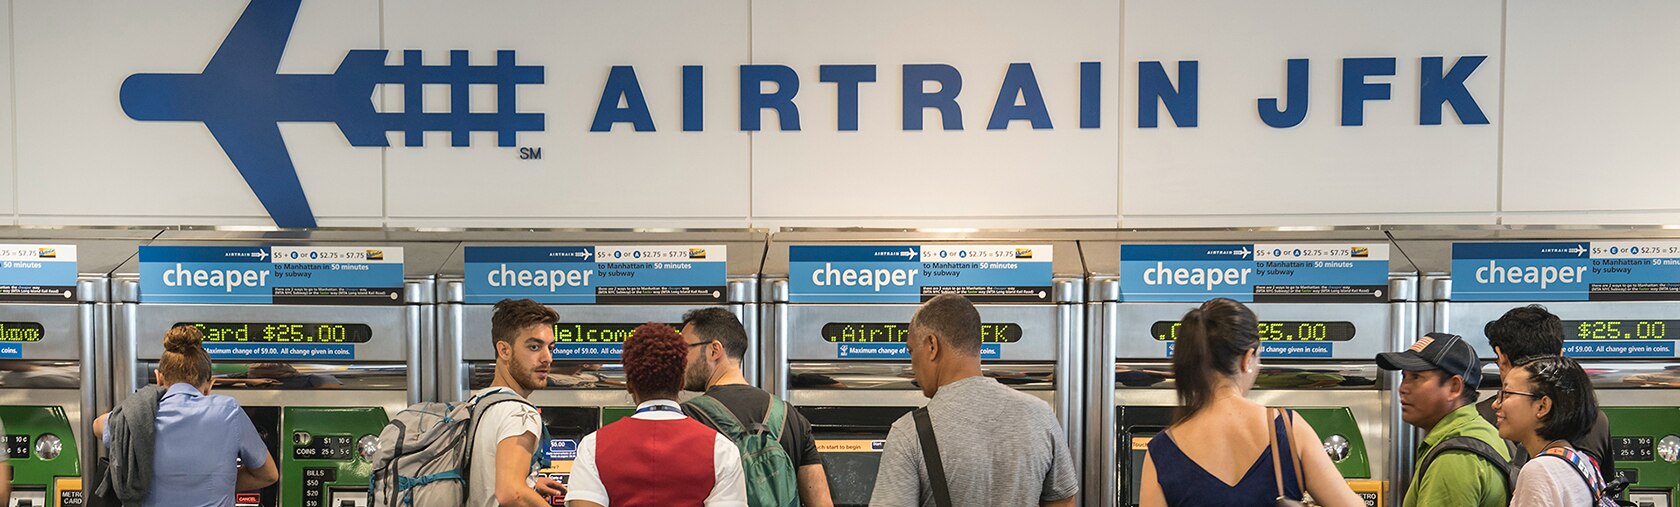 A sign saying AIRTRAIN JFK stretches across a wall above a line of MetroCard vending machines. People with backpacks and luggage are gathered near the ticket machines.